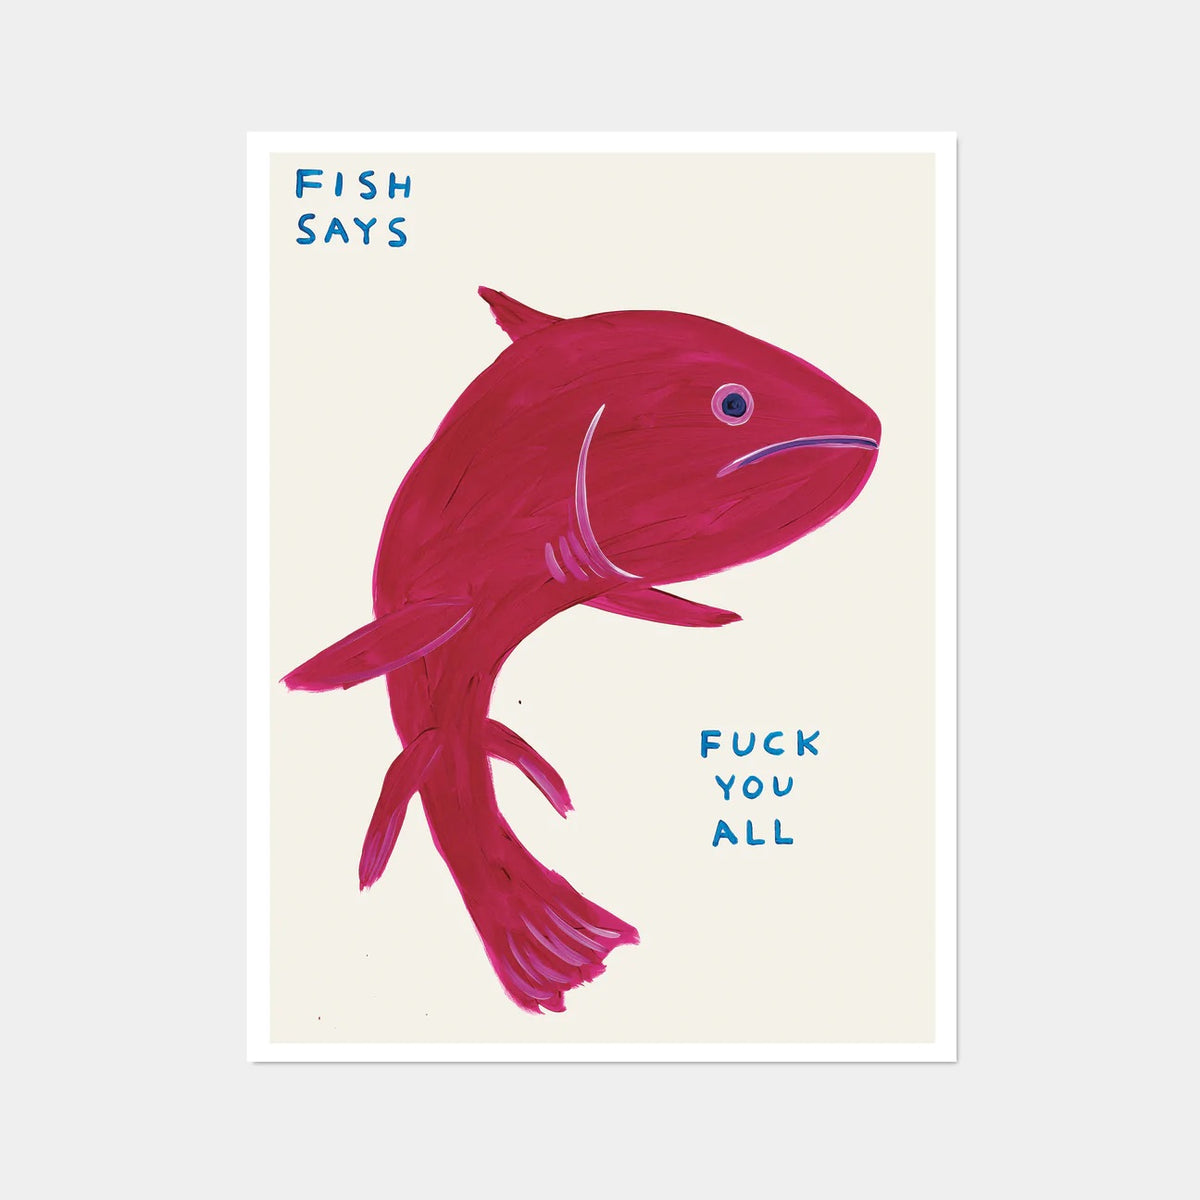 Fish Says Fuck You All by David Shrigley